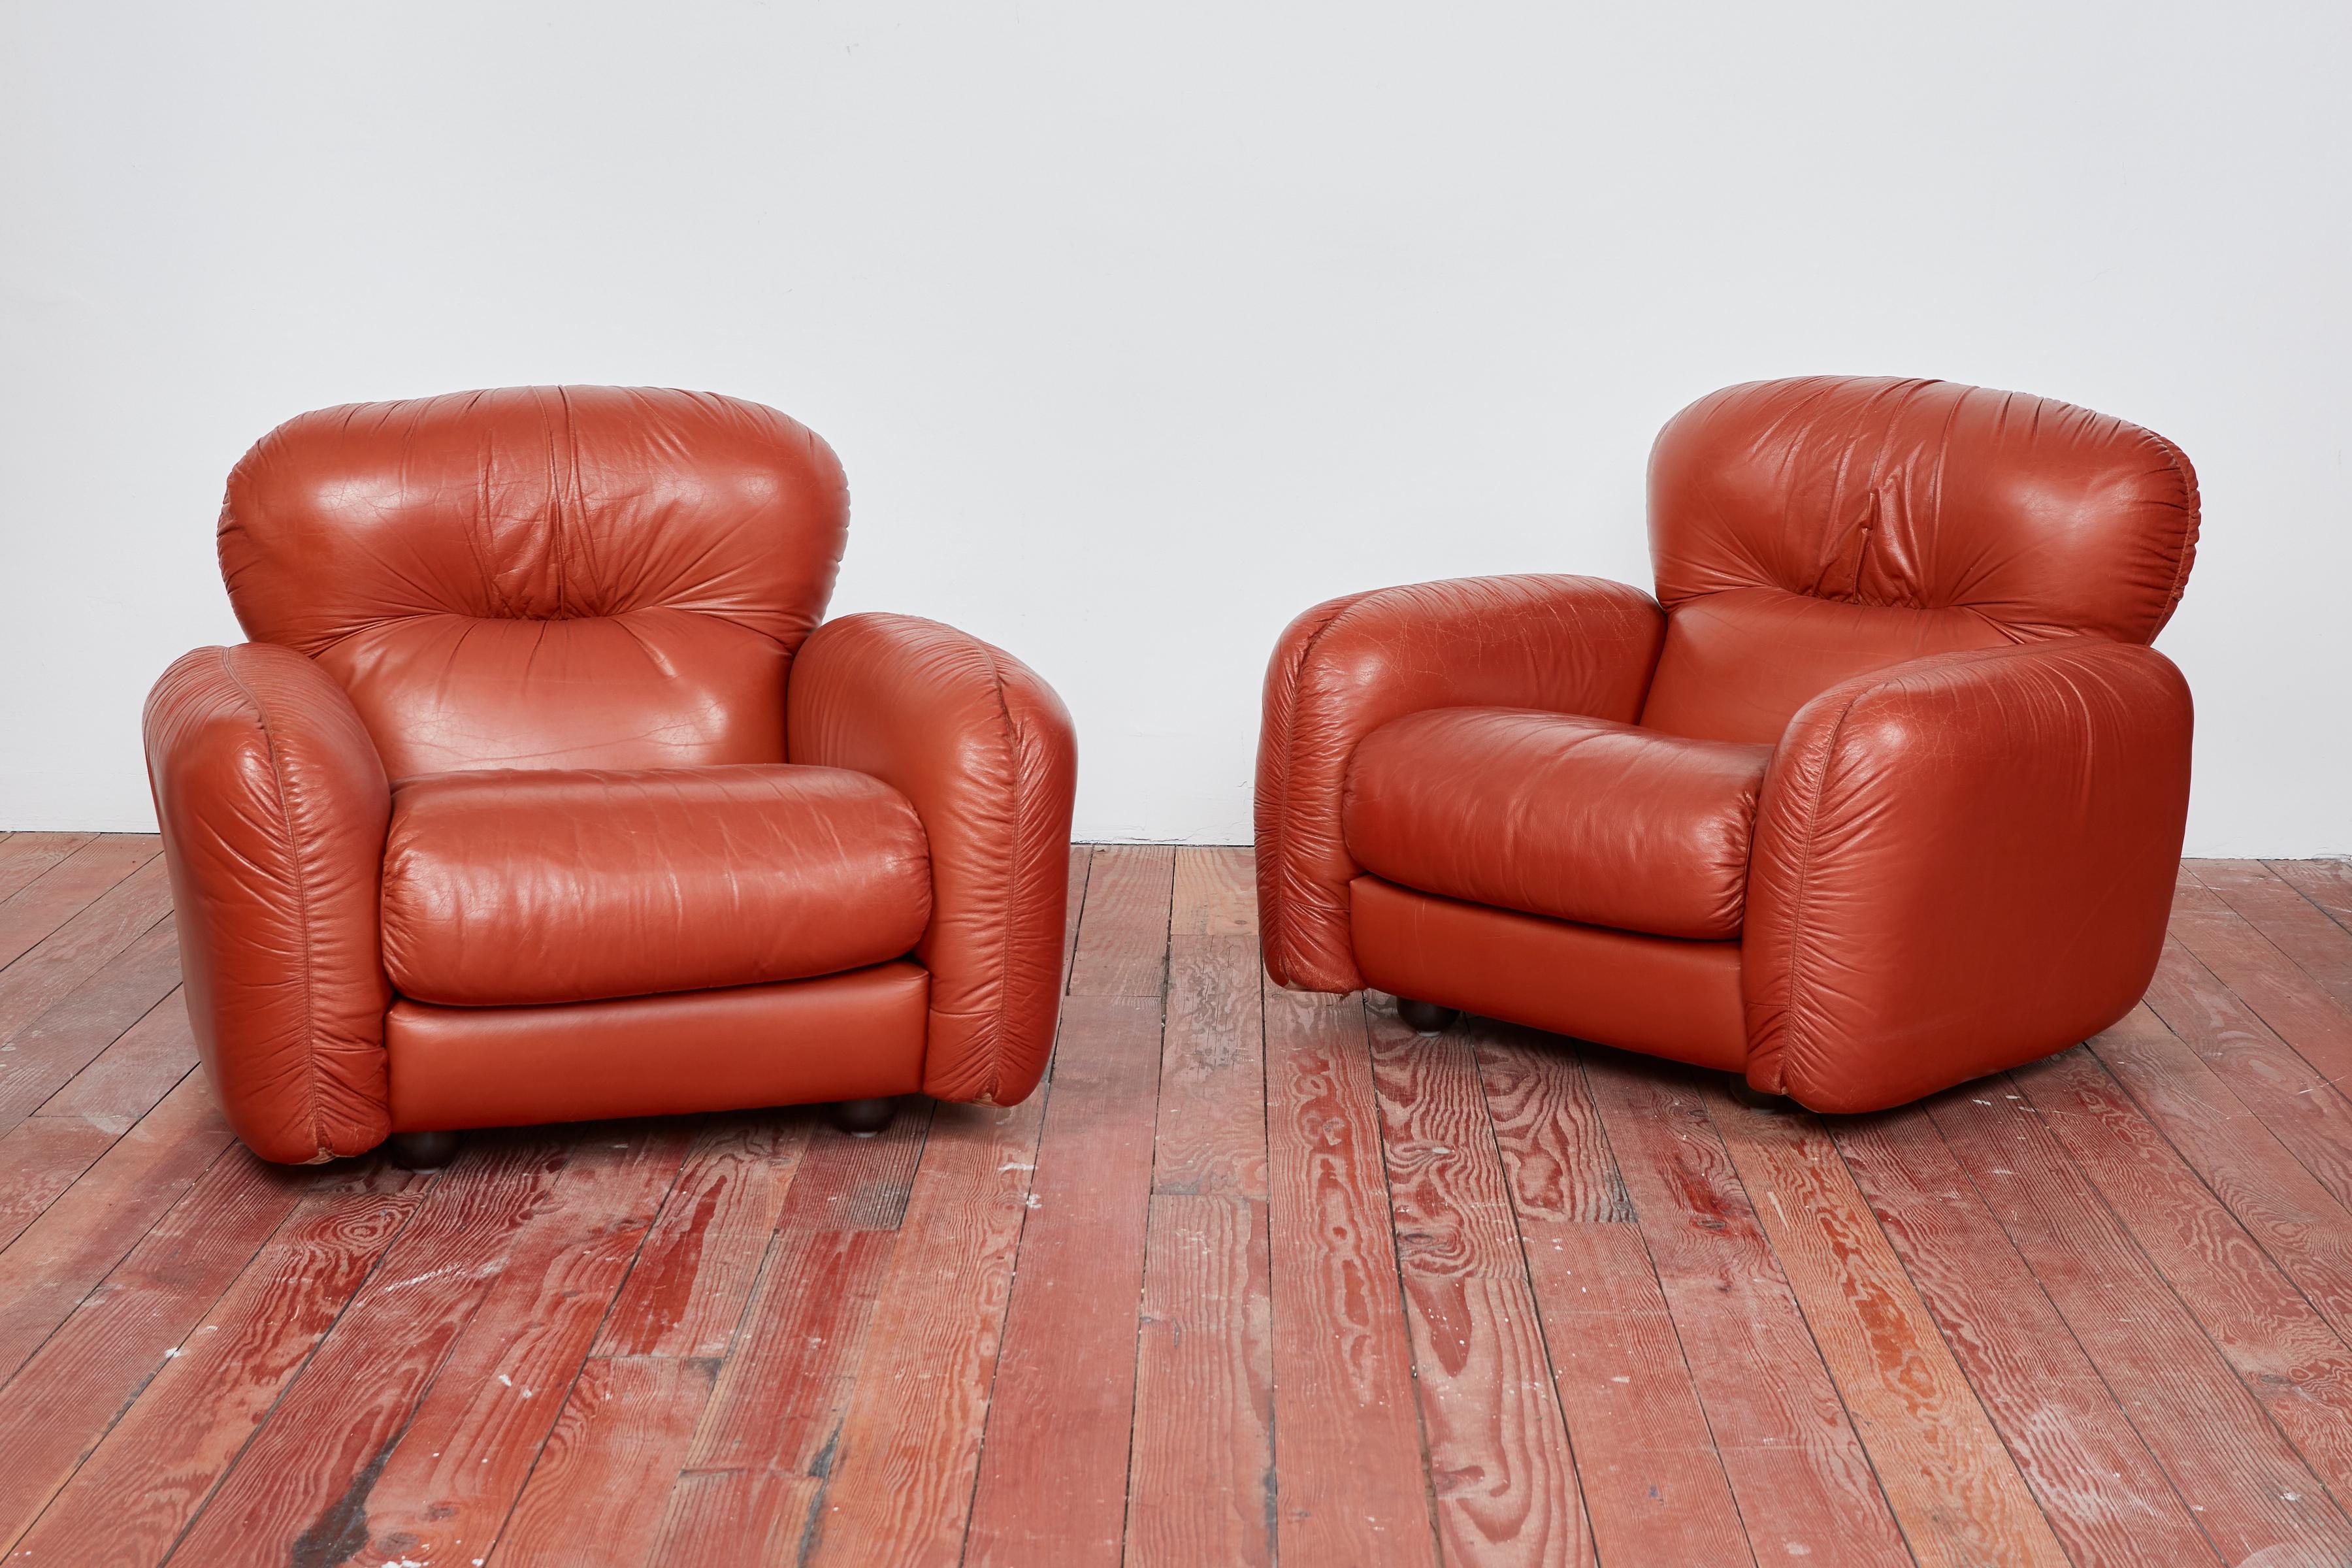 1970s Italian leather club chairs
Great simple bulbous shape and wonderfully rich patina to leather.